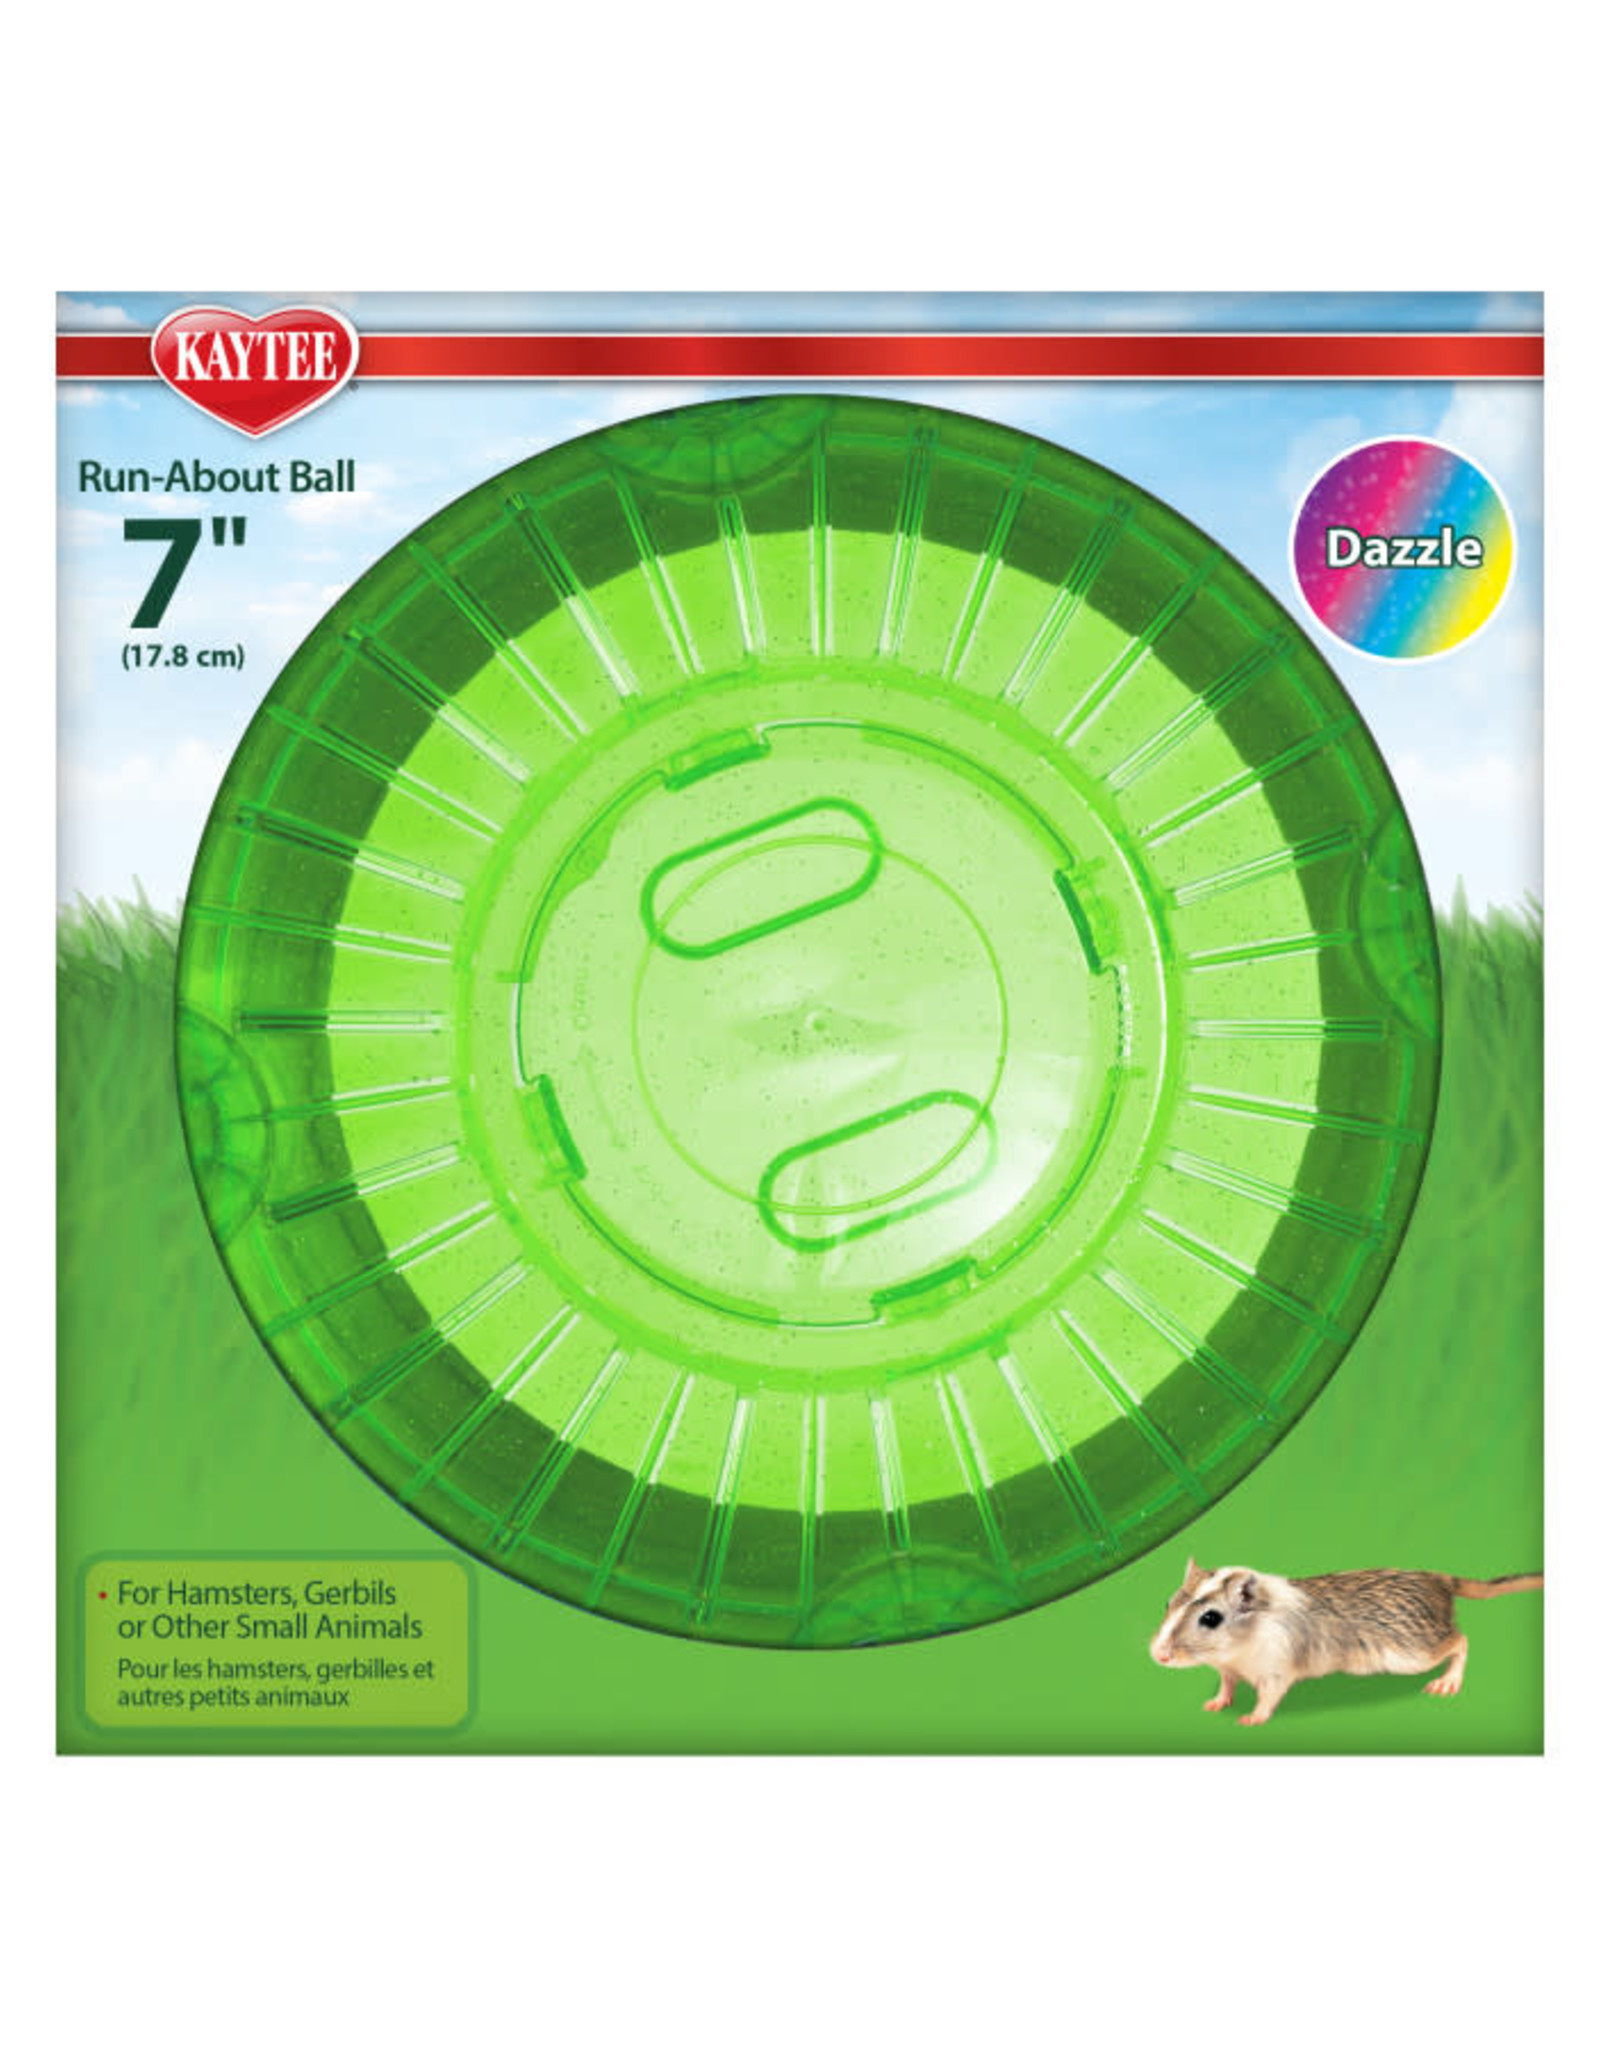 CENTRAL - KAYTEE PRODUCTS SUPER PET- RUN ABOUT BALL- 7 DIA- DAZZLE